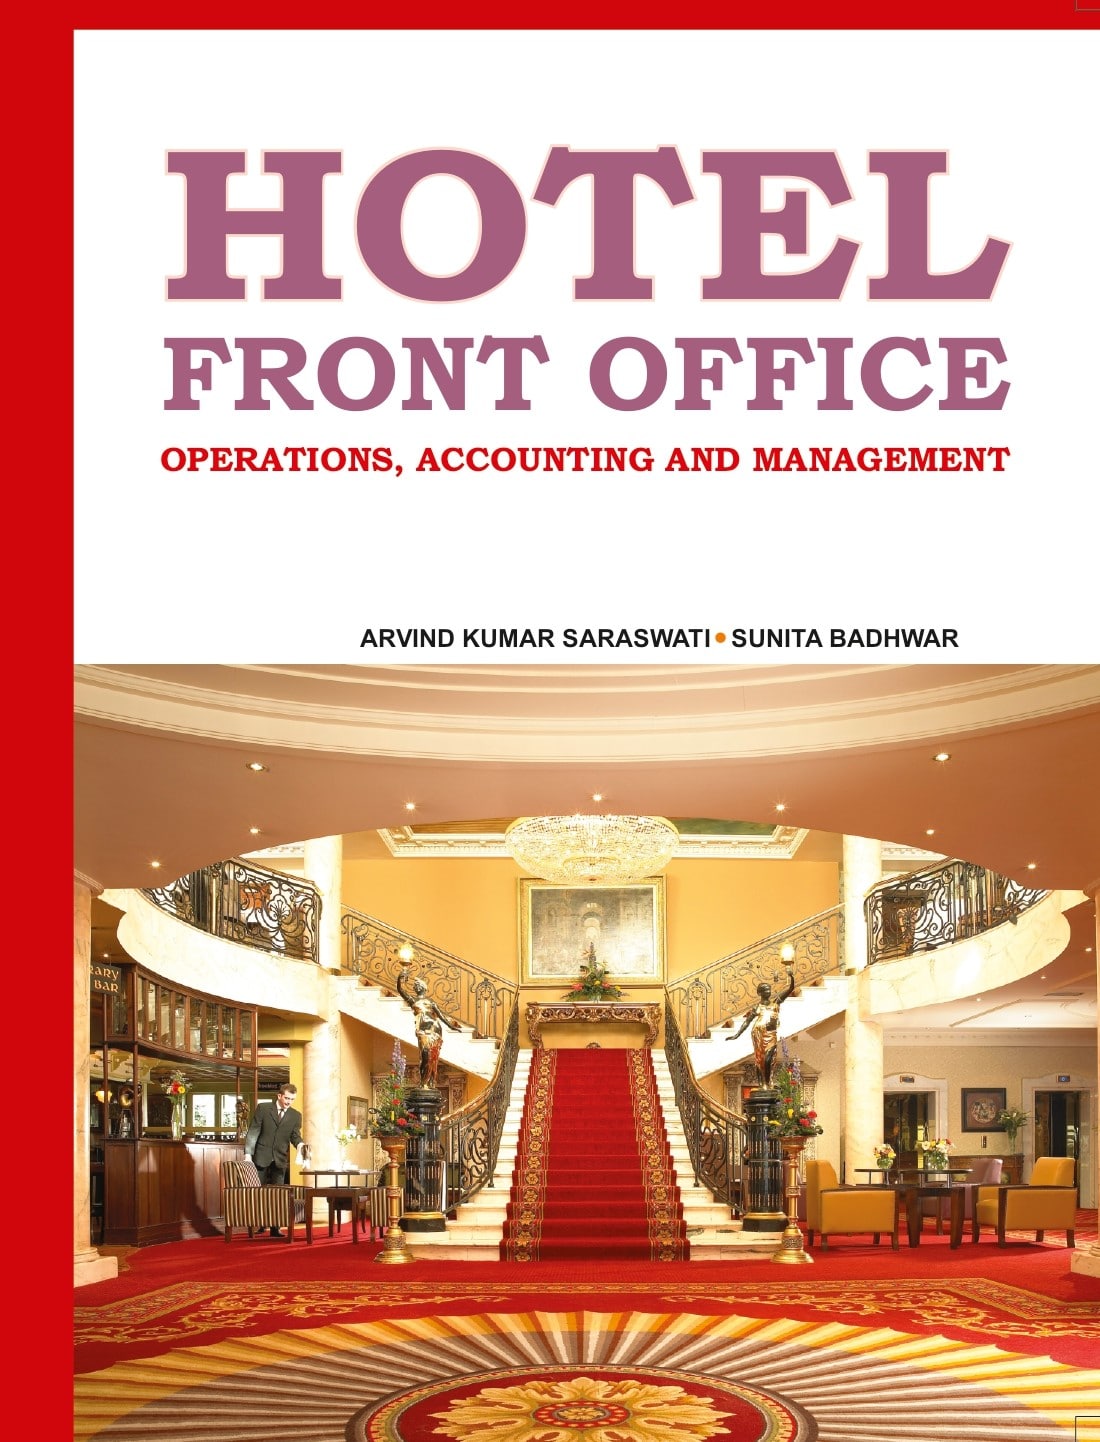 Hotel Front Office: Operations, Accounting and Management